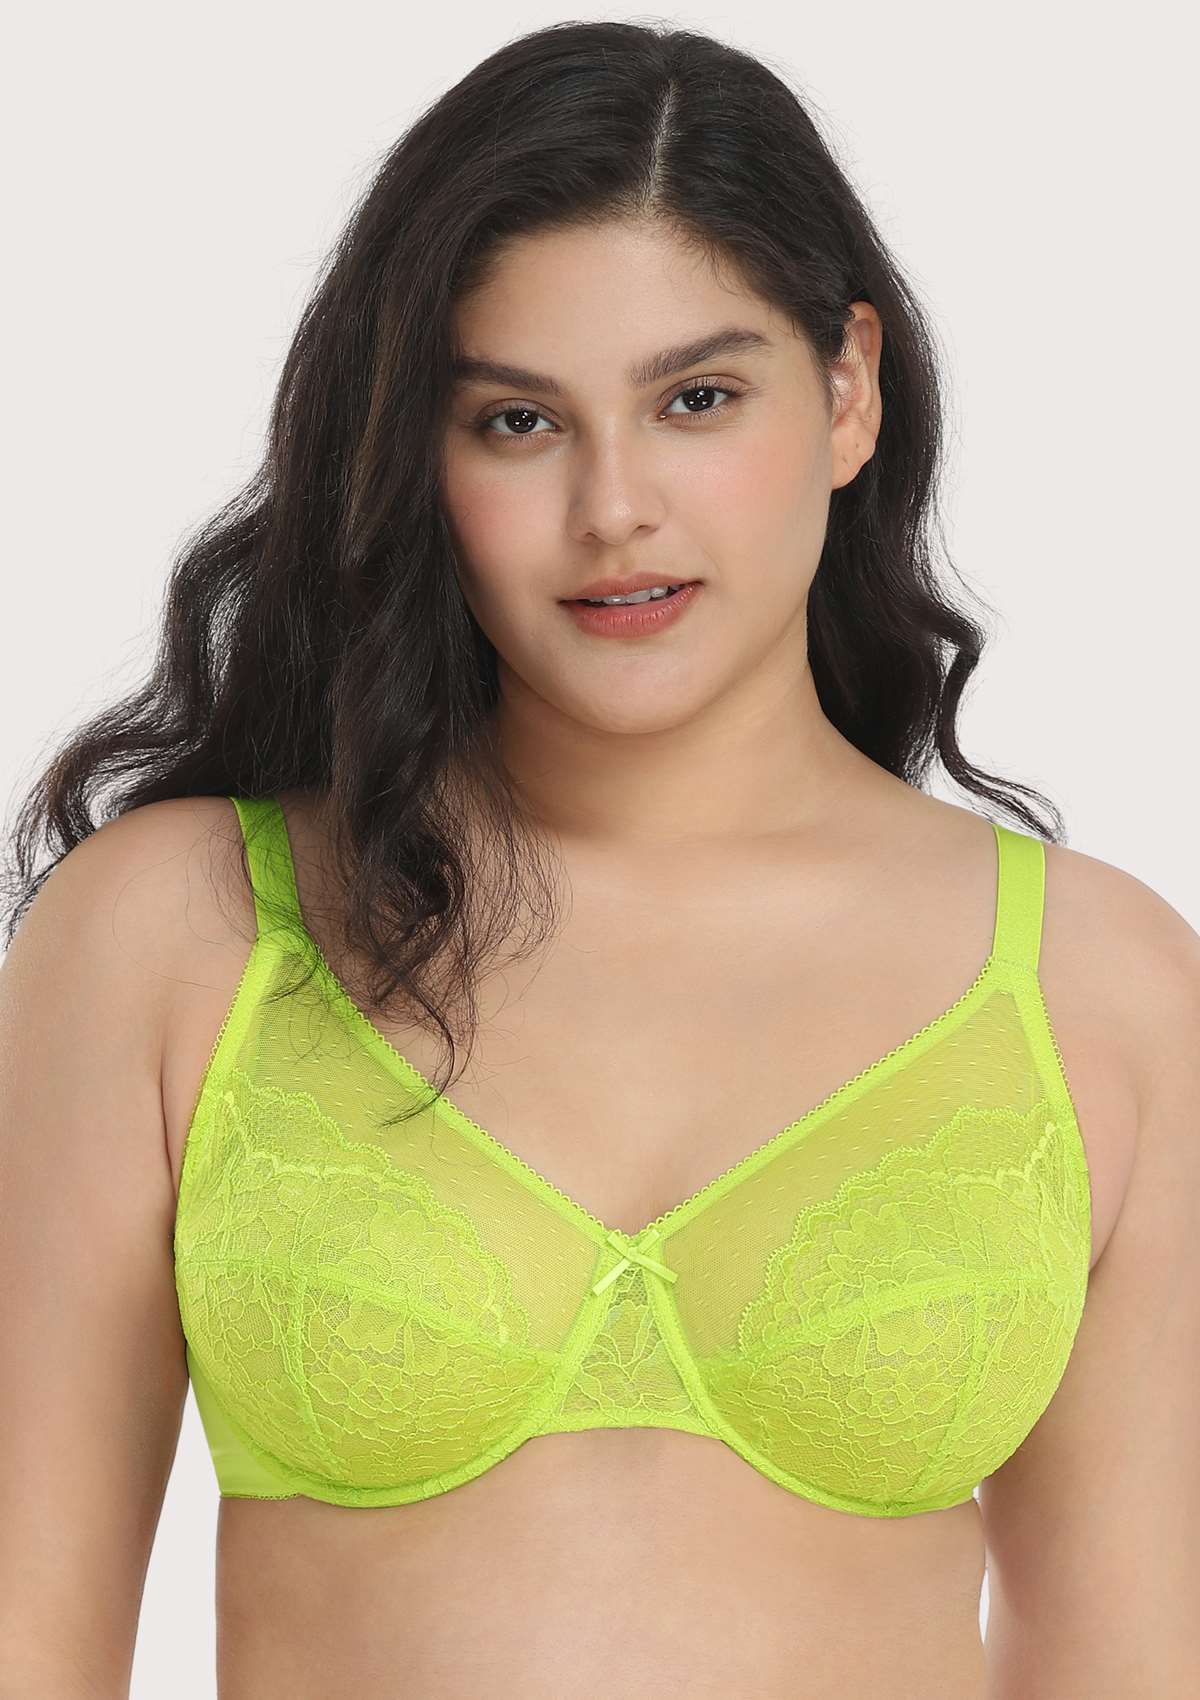 HSIA Enchante Full Cup Minimizing Bra: Supportive Unlined Lace Bra - Lime Green / 40 / C